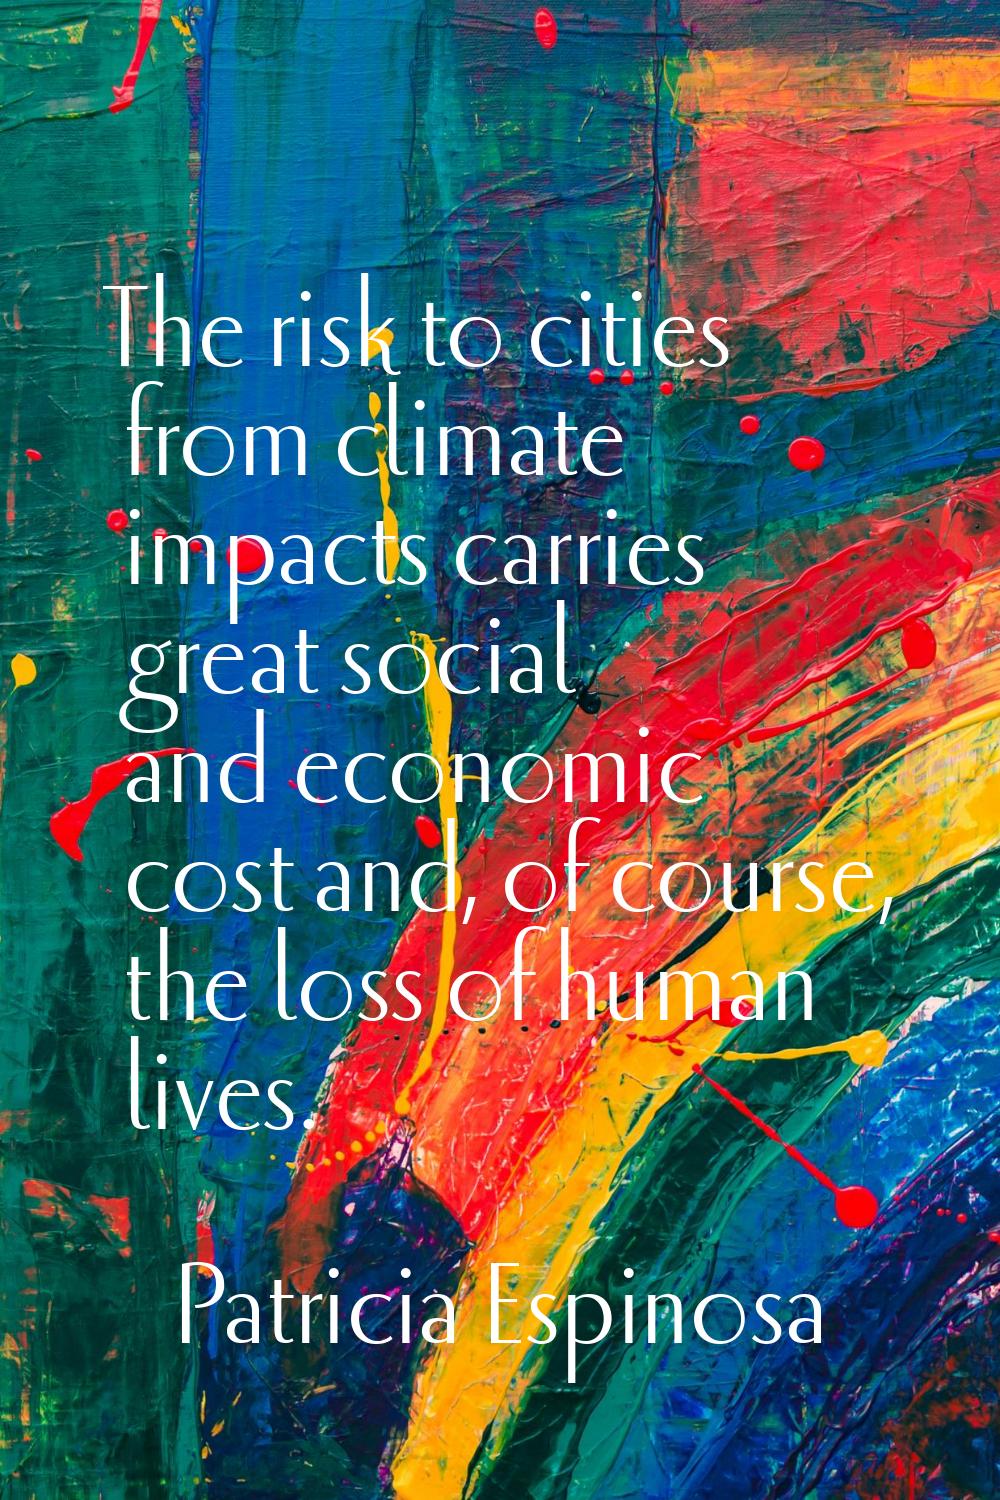 The risk to cities from climate impacts carries great social and economic cost and, of course, the 